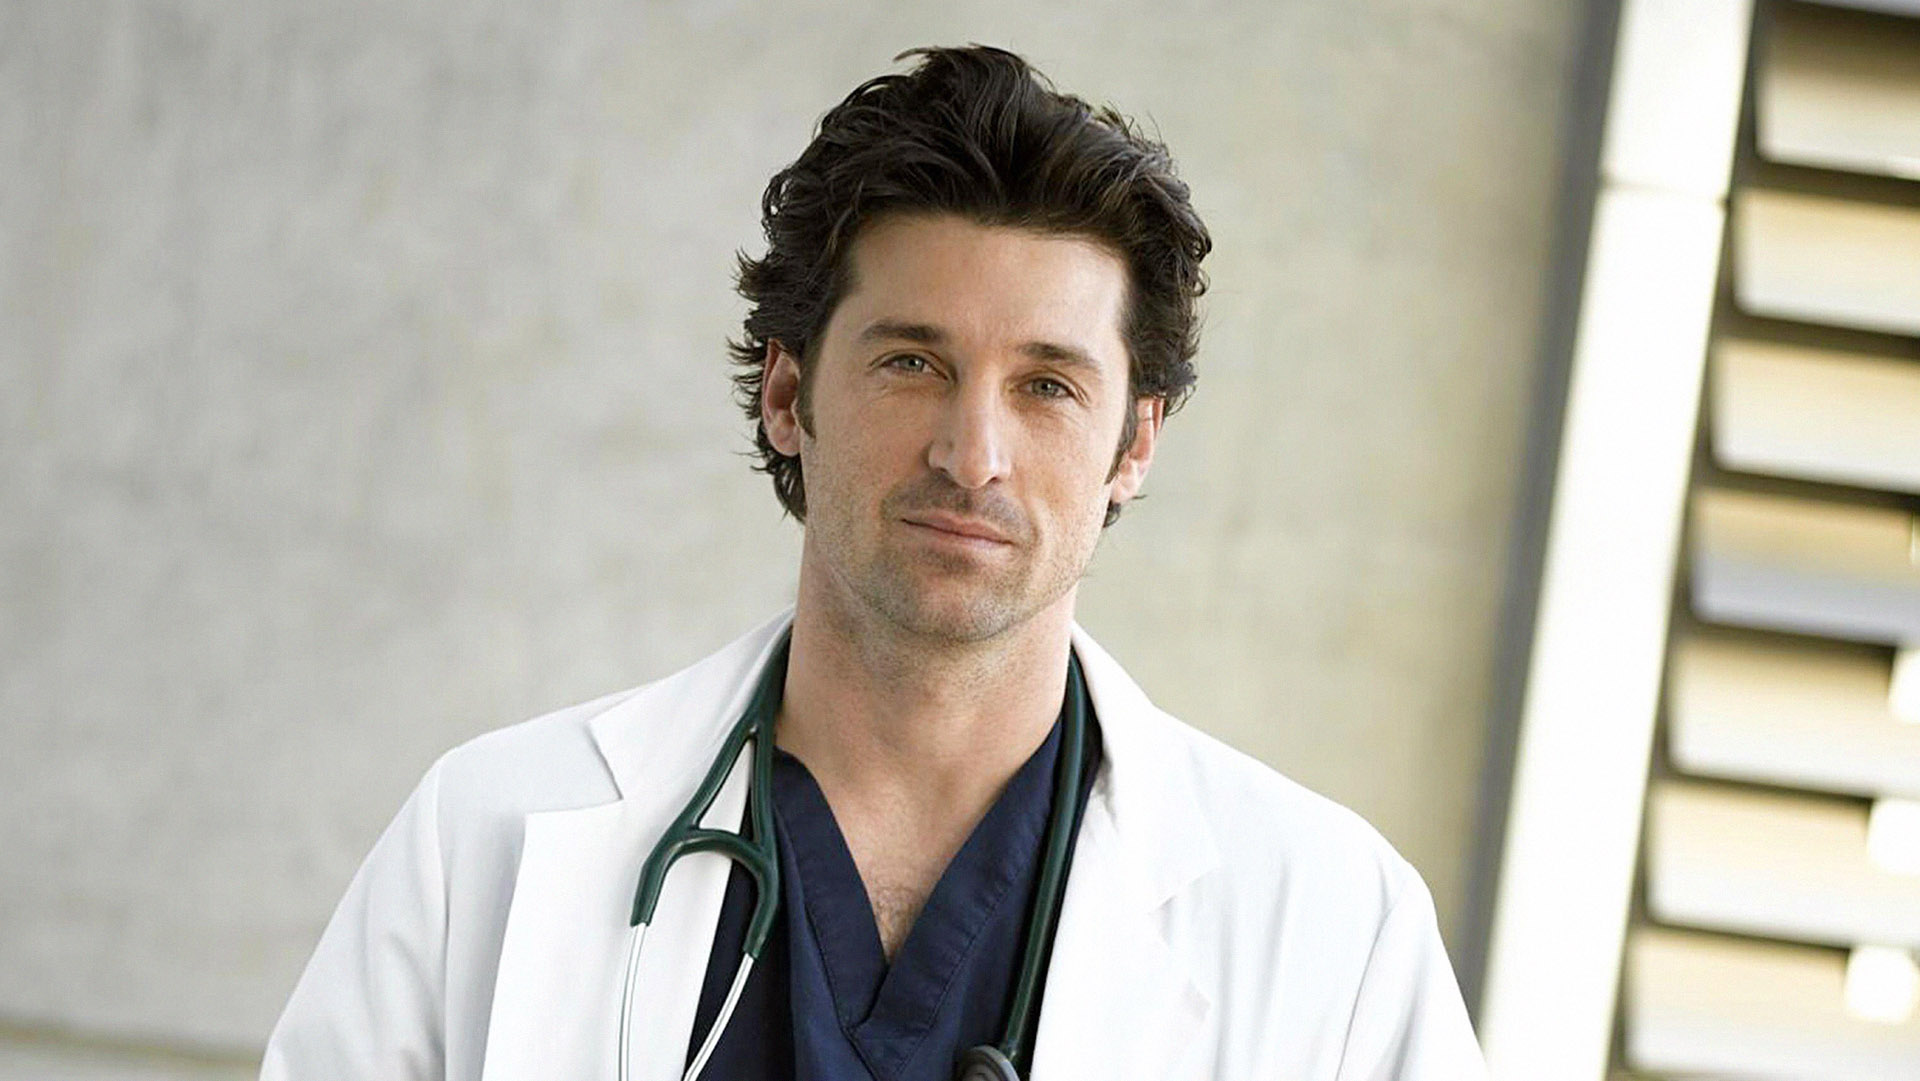 Move Over, McDreamy: Ranking the 8 Hottest Male Doctors on TV 